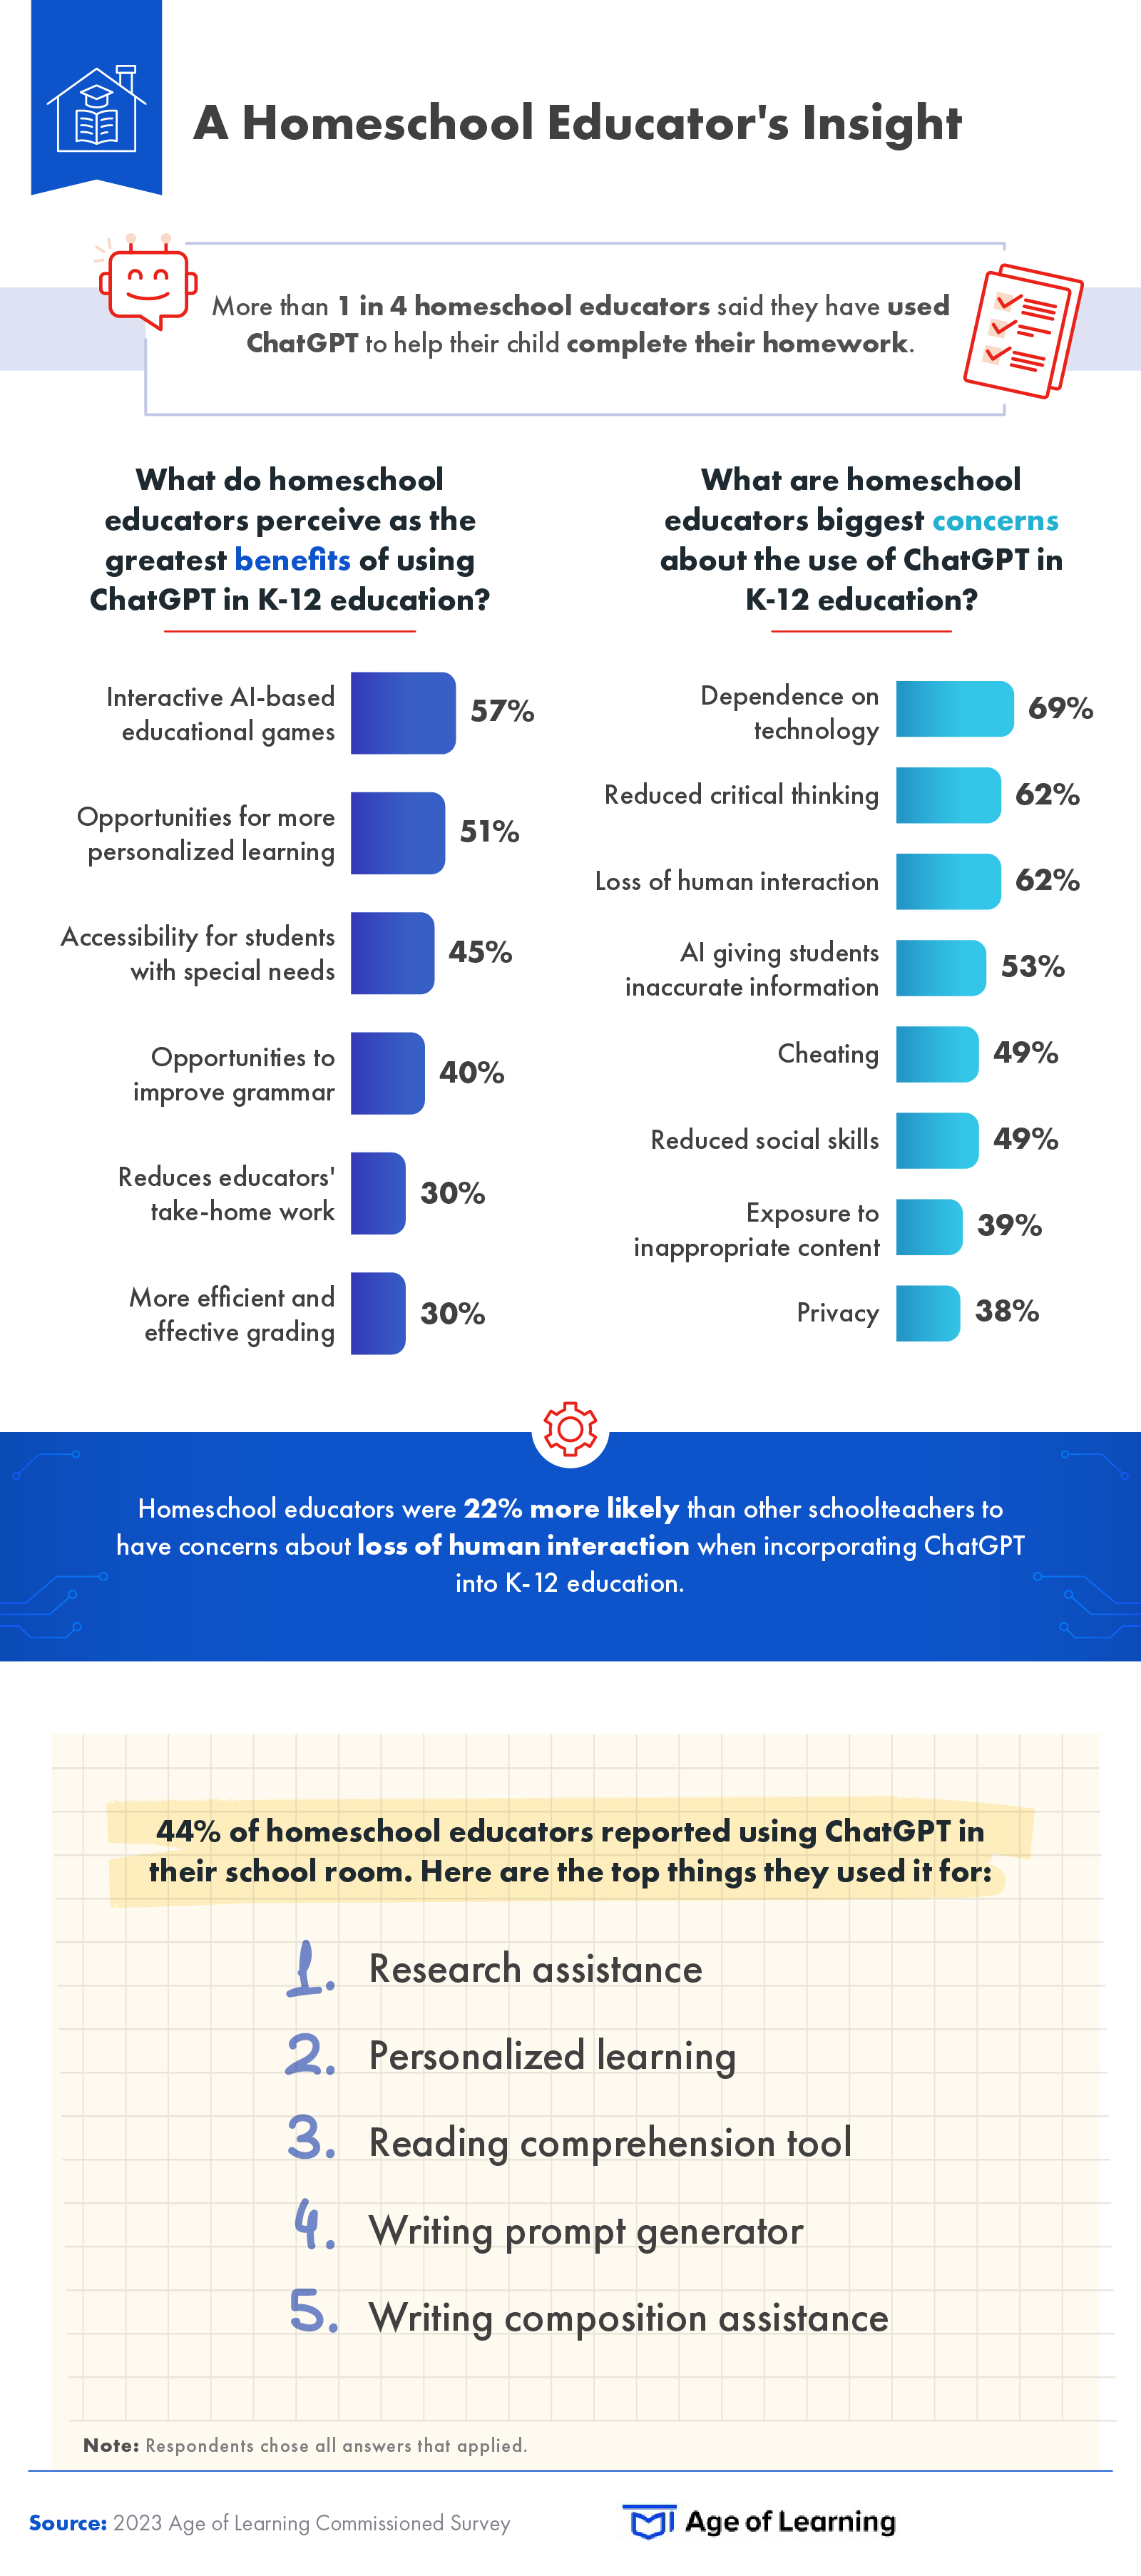 This infographic explores homeschool educators perceived benefits and concerns of using ChatGPT in K-12 education. 